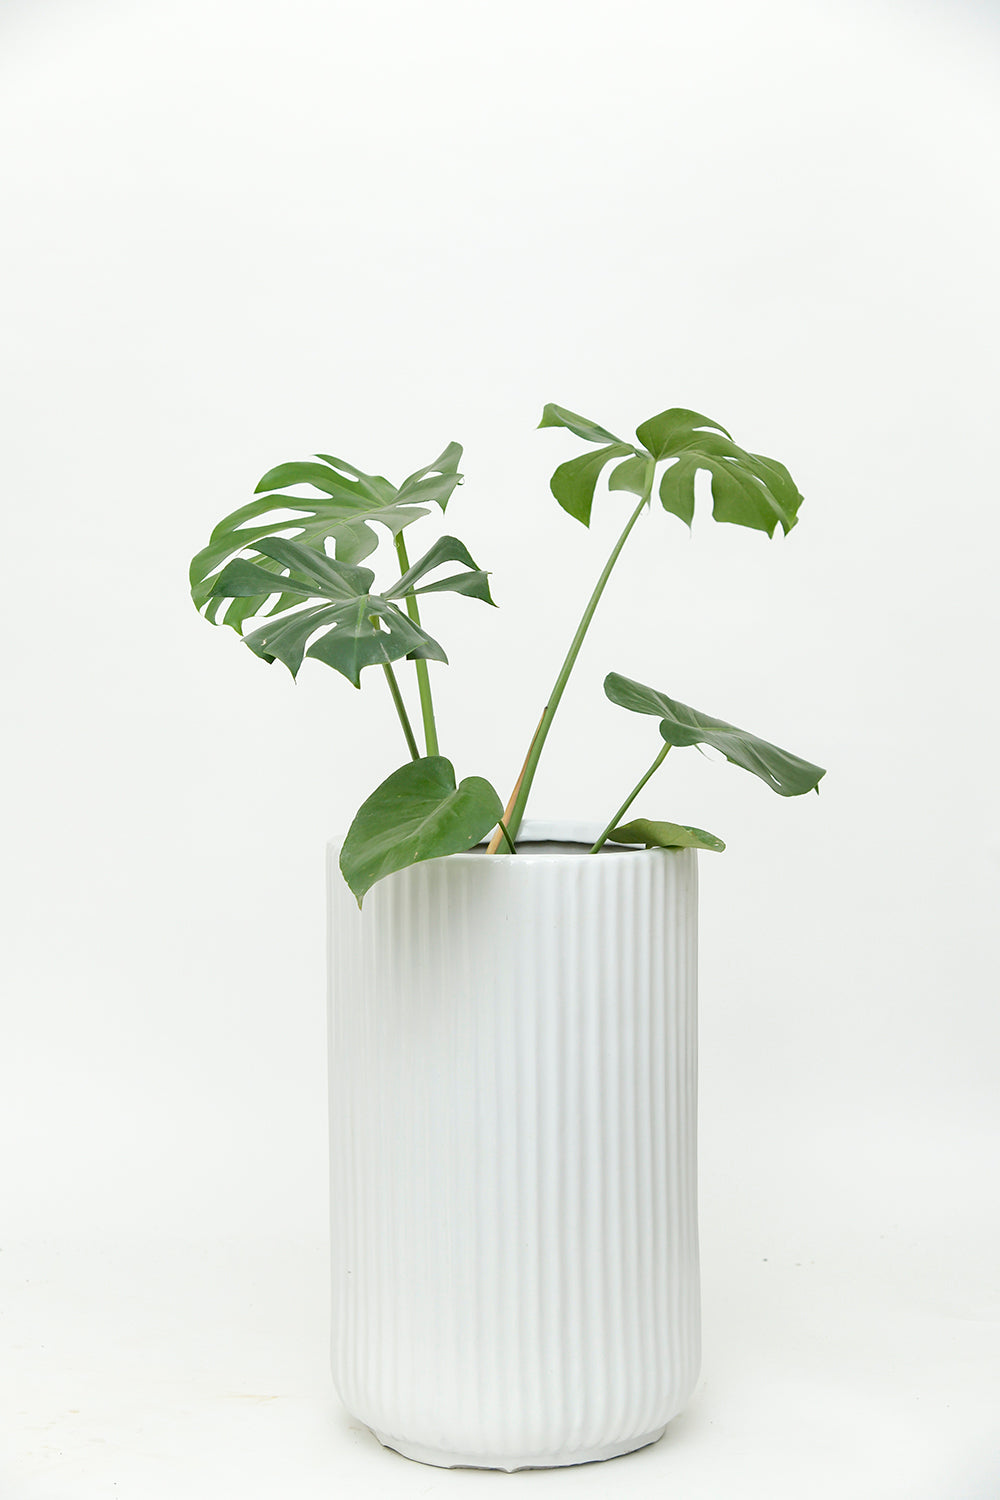 Tall size Pheonix ceramic planter in White color with Monstera plant in it.